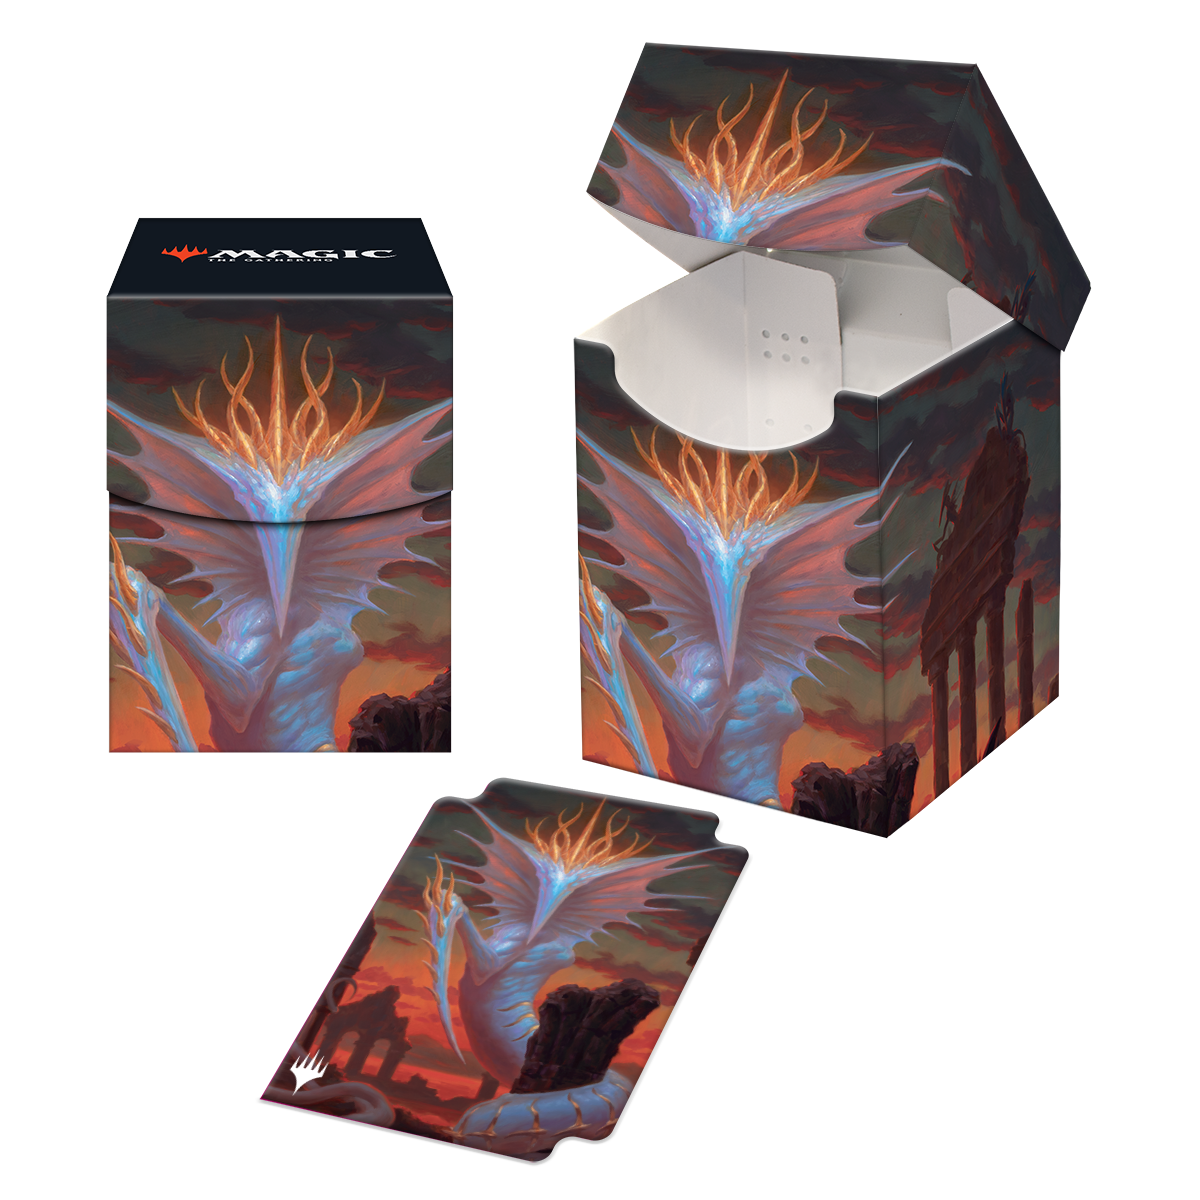 Commander Masters Sliver Gravemother 100+ Deck Box for Magic: The Gathering | Ultra PRO International